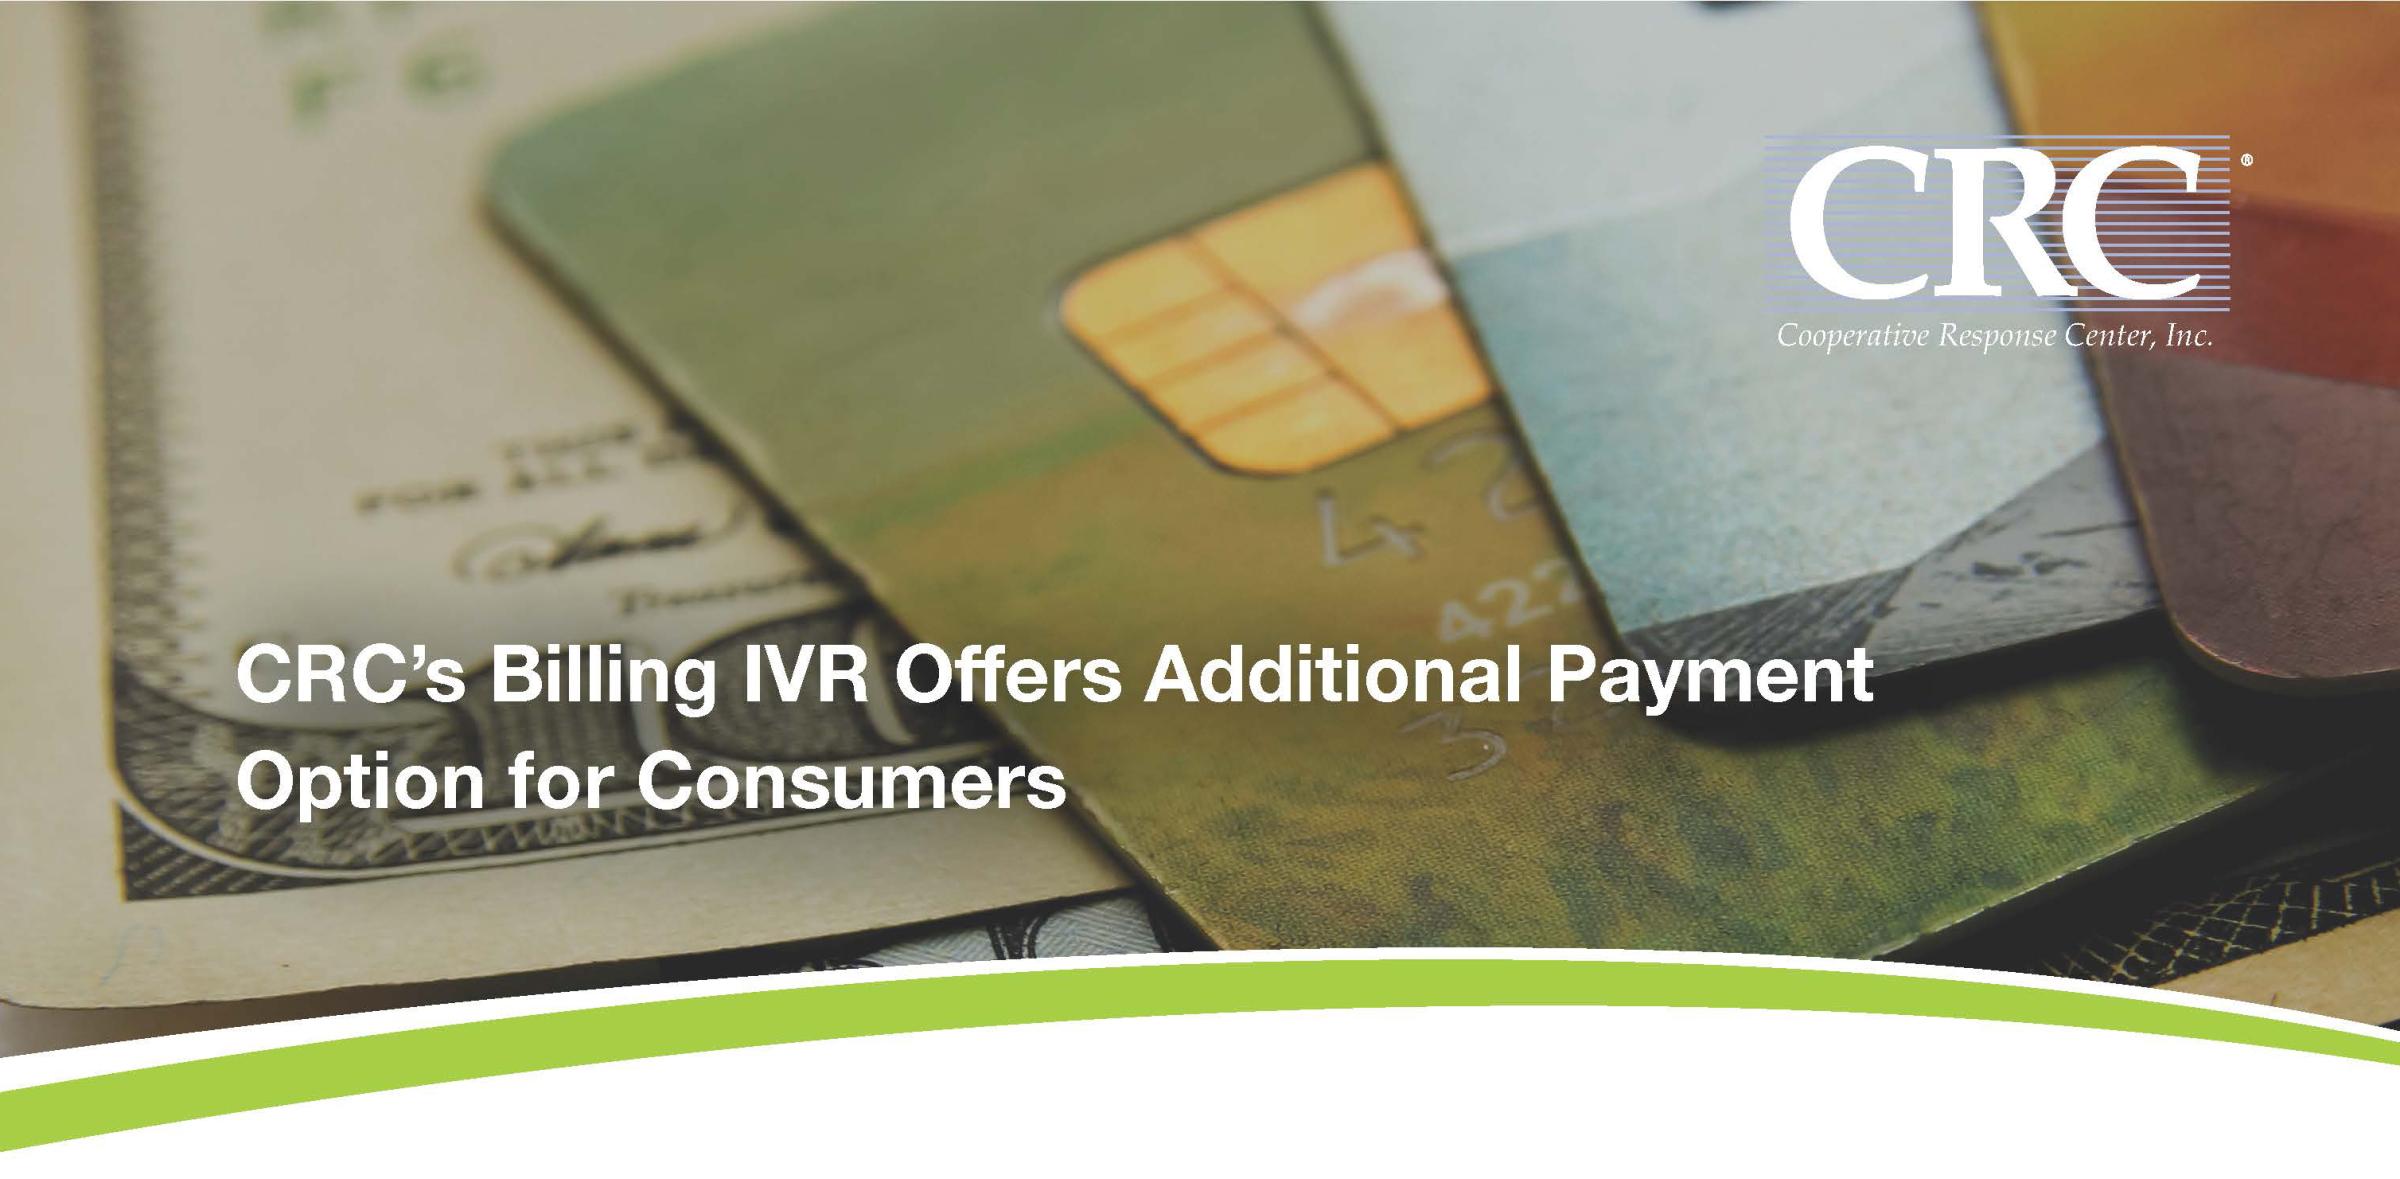 CRC's Billing IVR Offers Additional Payment Option for Consumers